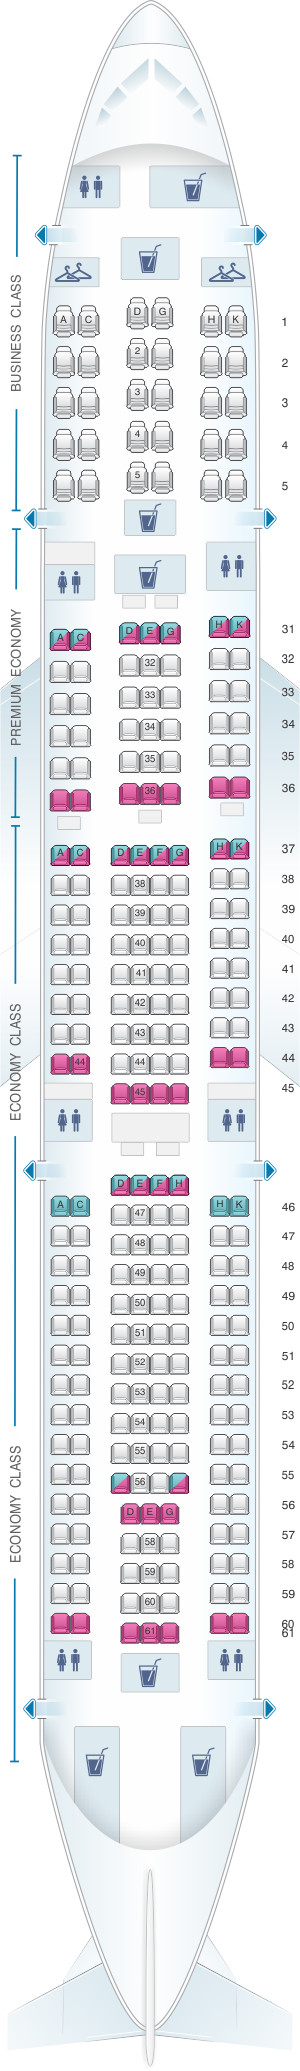 Seat map for China Southern Airlines Airbus A33B